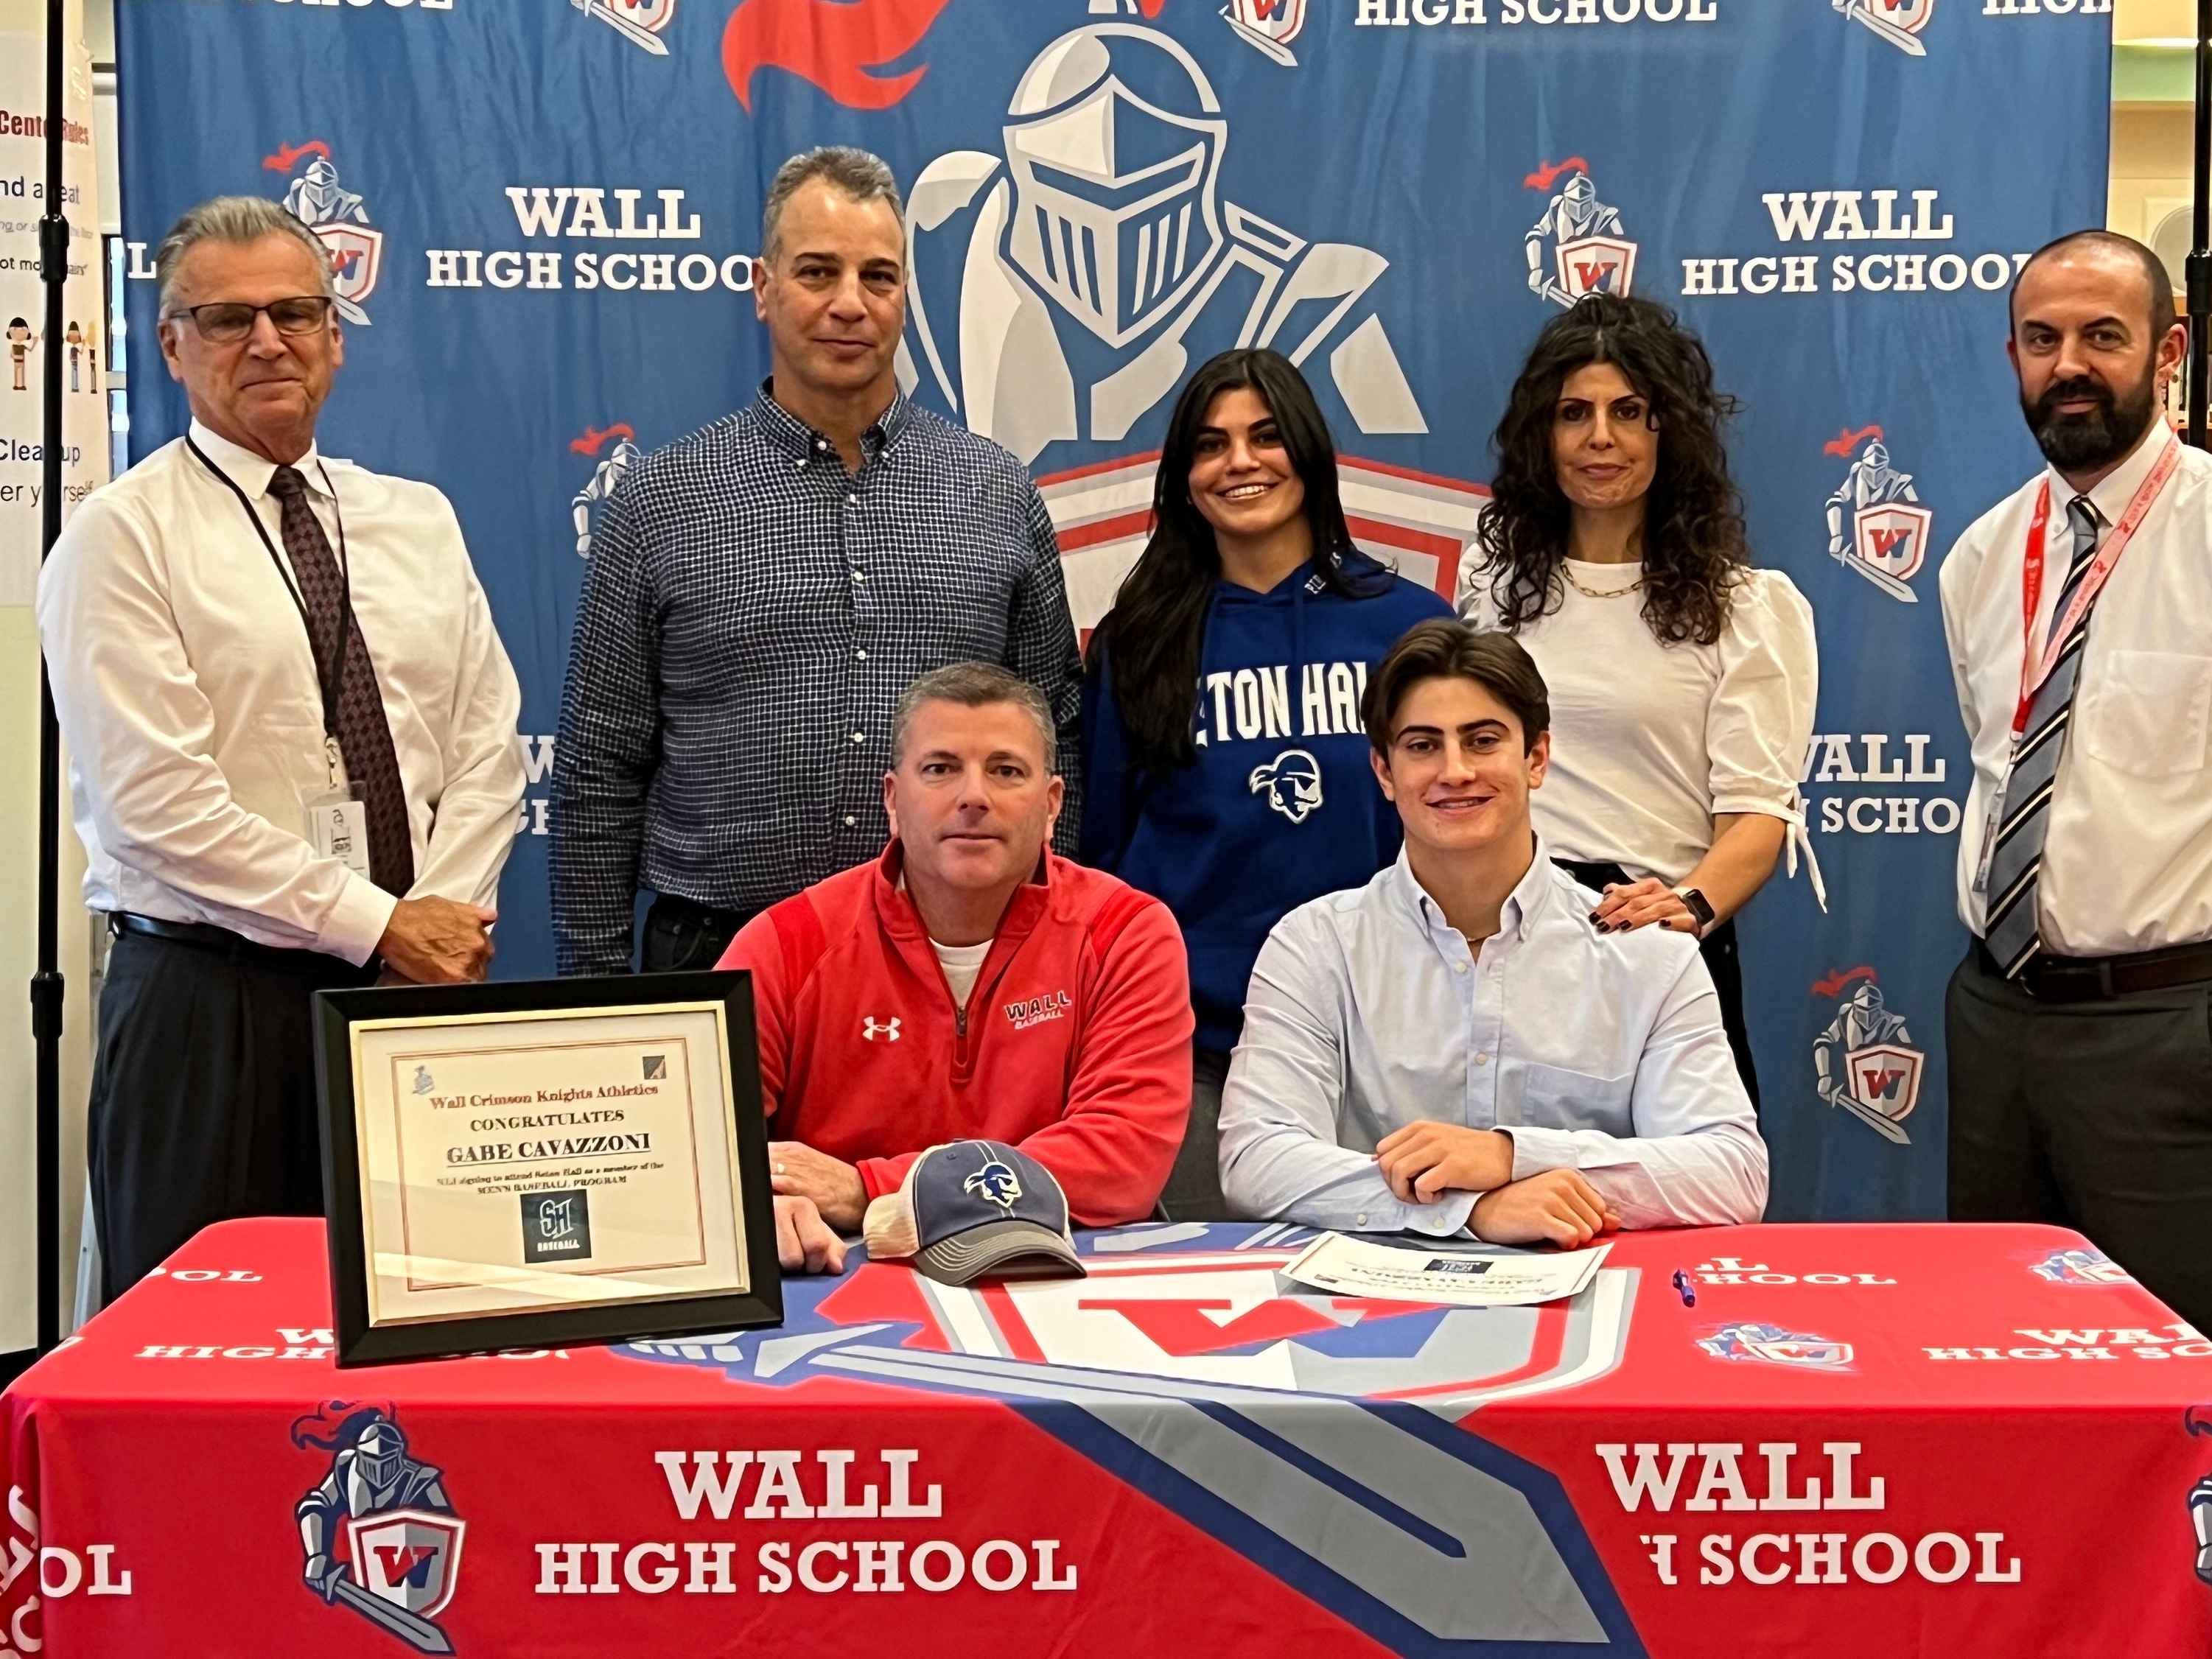 Bottom sitting, right-left, Gabe Cavazzoni & Wall head base coach James Rochford; Standing left to right, Wall HS Principal Dr. Pete Riggi, Dad, Sister, Mom, Kevin Davis Assistant Principal